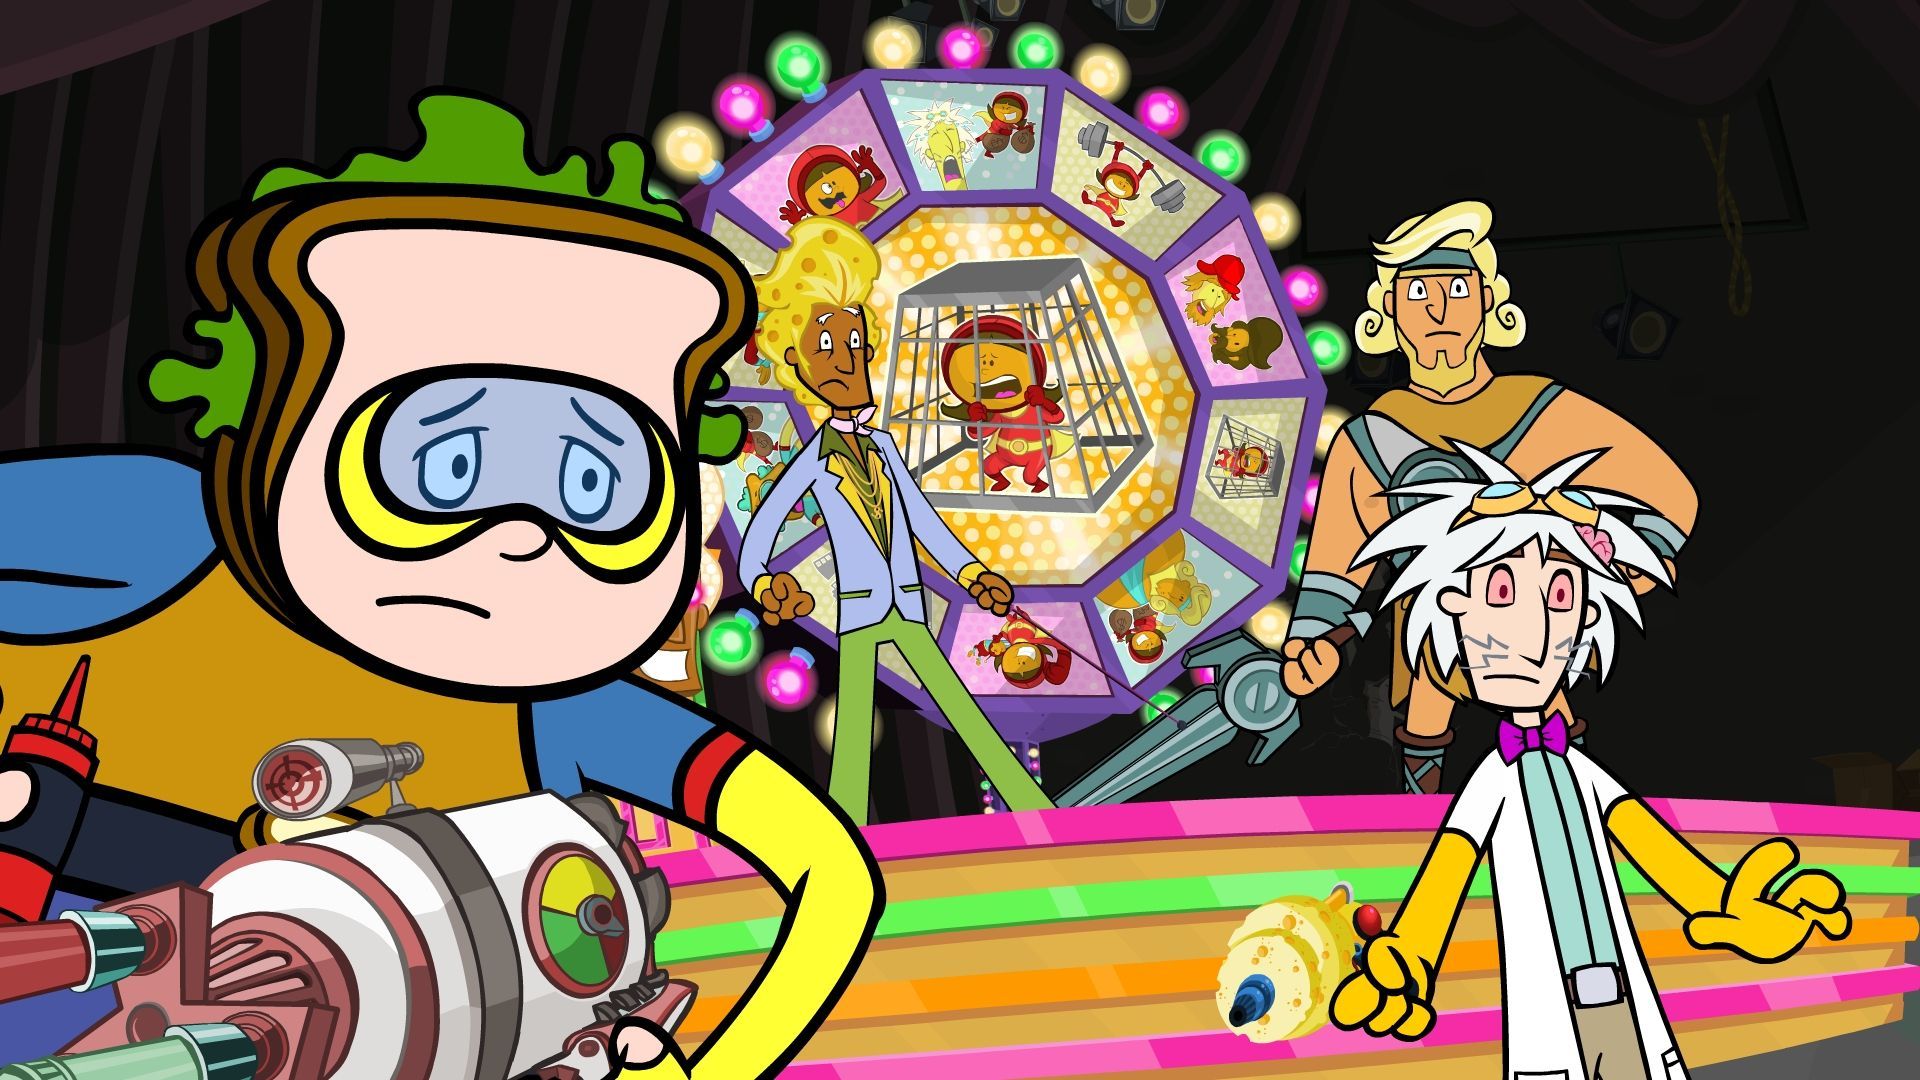 On Monday, Seymour Smooth will bring some of WordGirl's biggest villain enemies together to play a game of 'Who Wants to Get Rid of Wo. Kids shows, Enemy, Villain